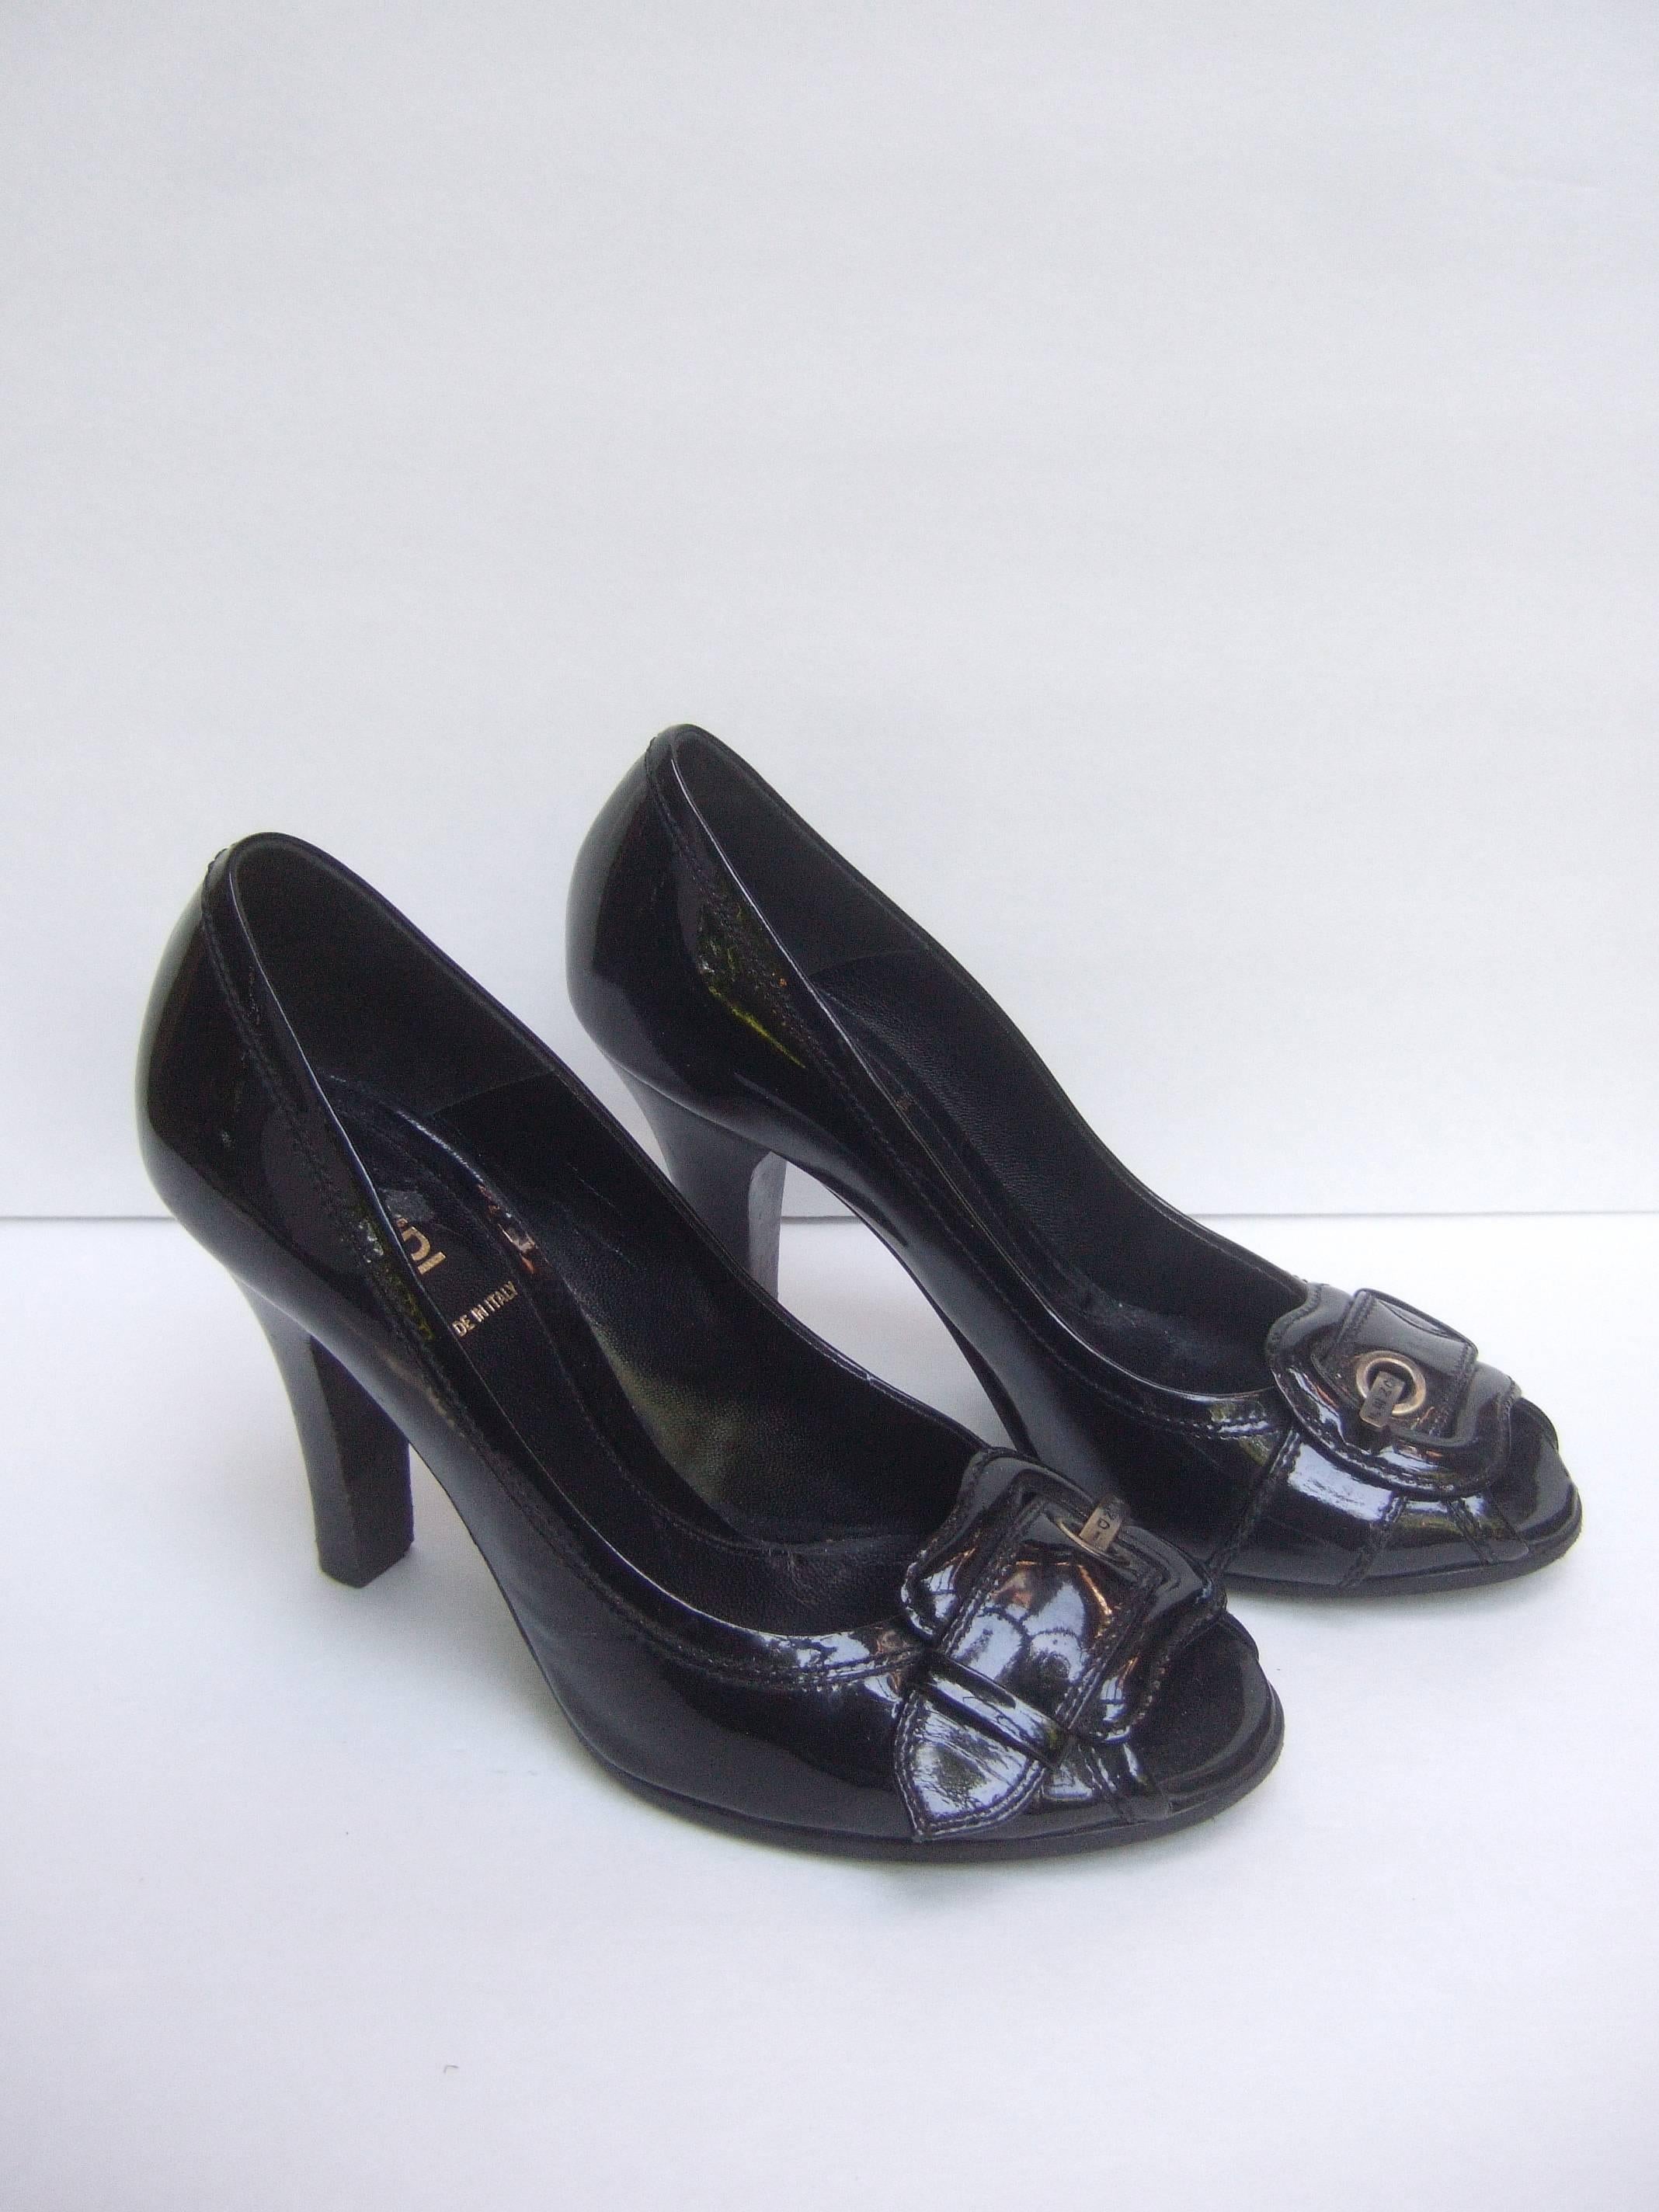 Fendi Italy Black Patent Leather Buckle Pumps 37.5 For Sale 1